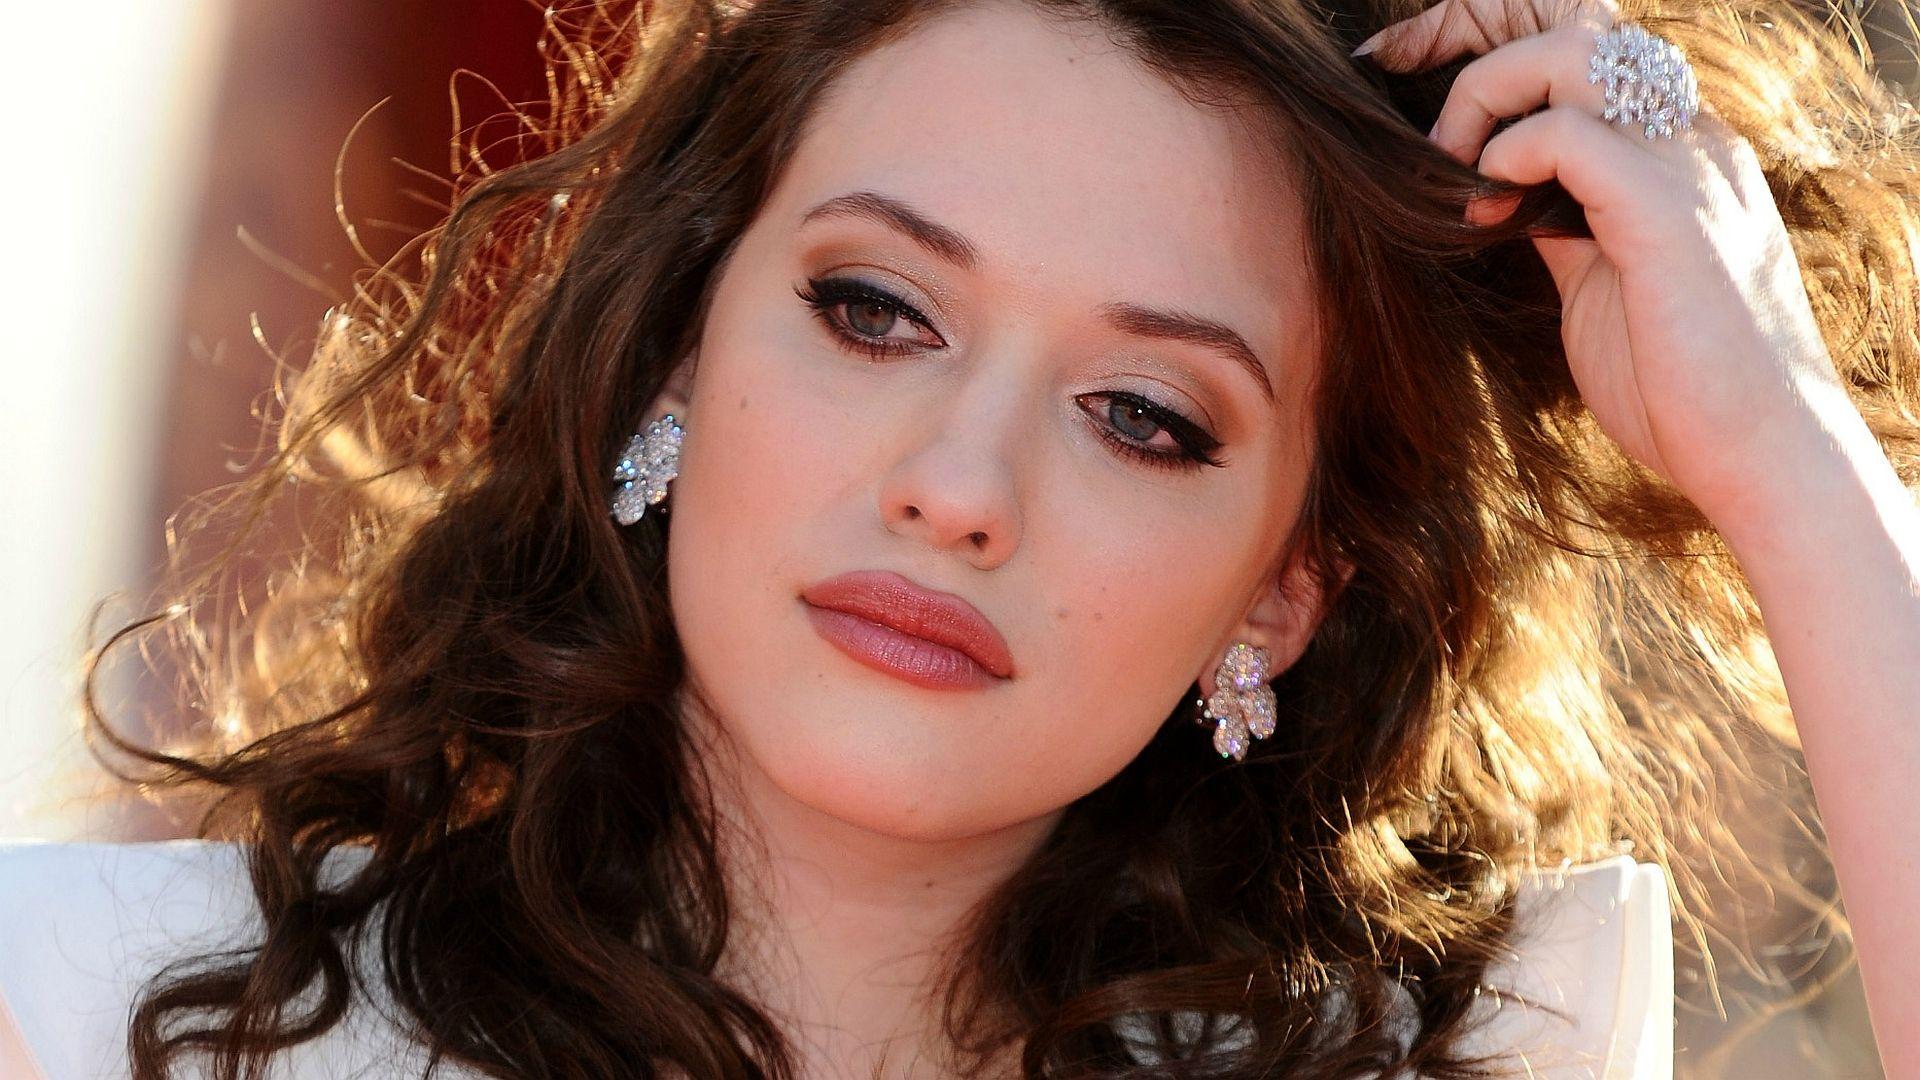 HD wallpaper kat dennings looking at camera young adult young women  one person  Wallpaper Flare